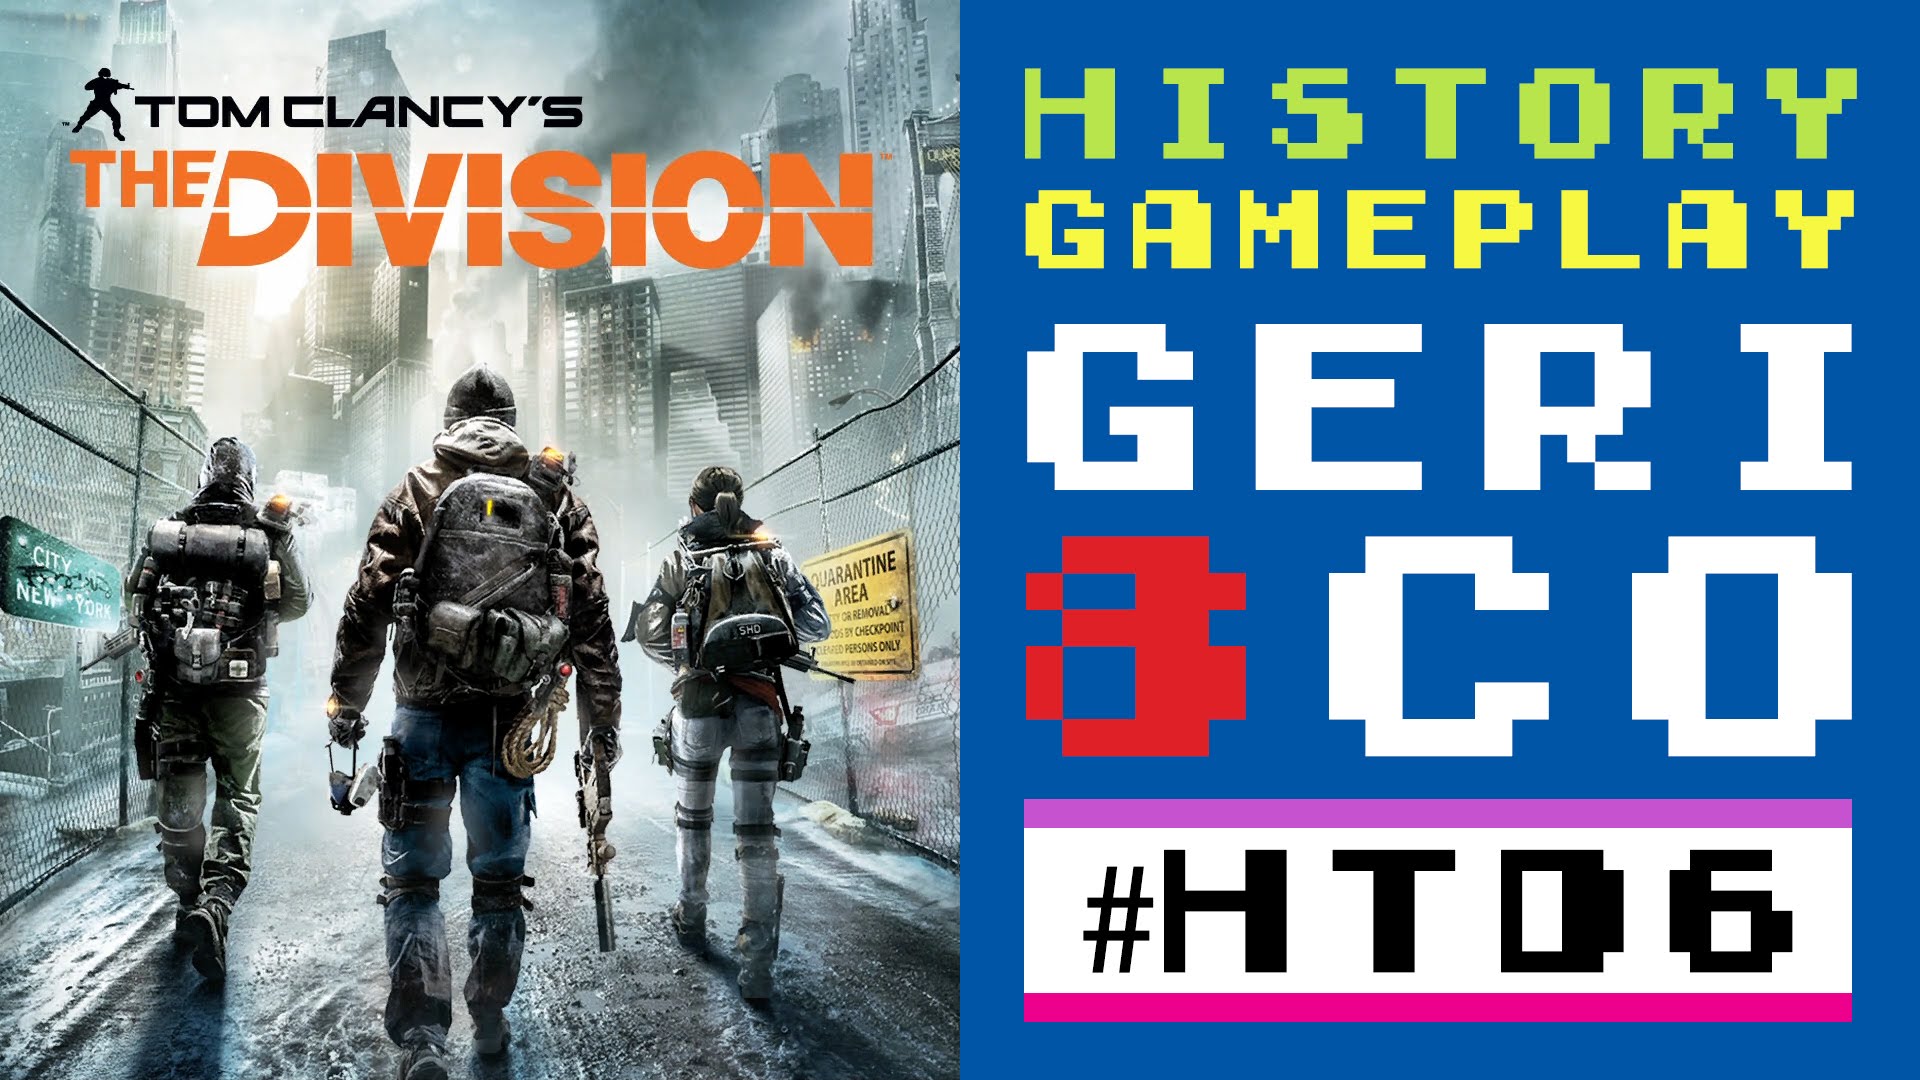 THE DIVISION 1A TEMPORADA (HISTORY GAMEPLAY) #HTD6 de Fredolic2013